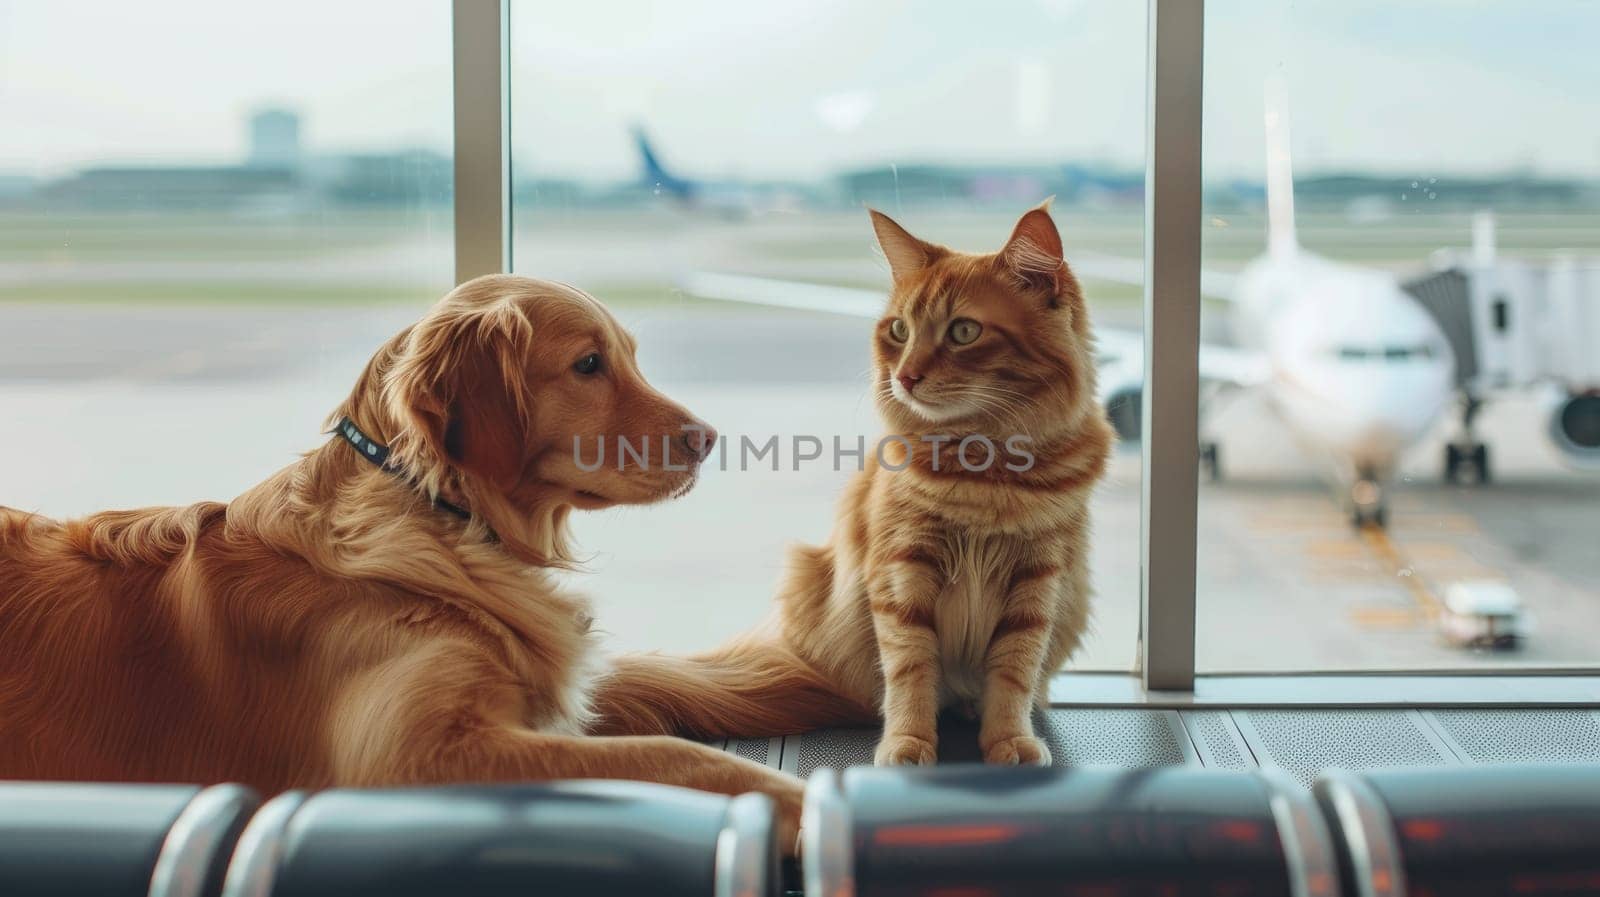 A dog and a cat are sitting on a bench in an airport waiting for their flight by nijieimu